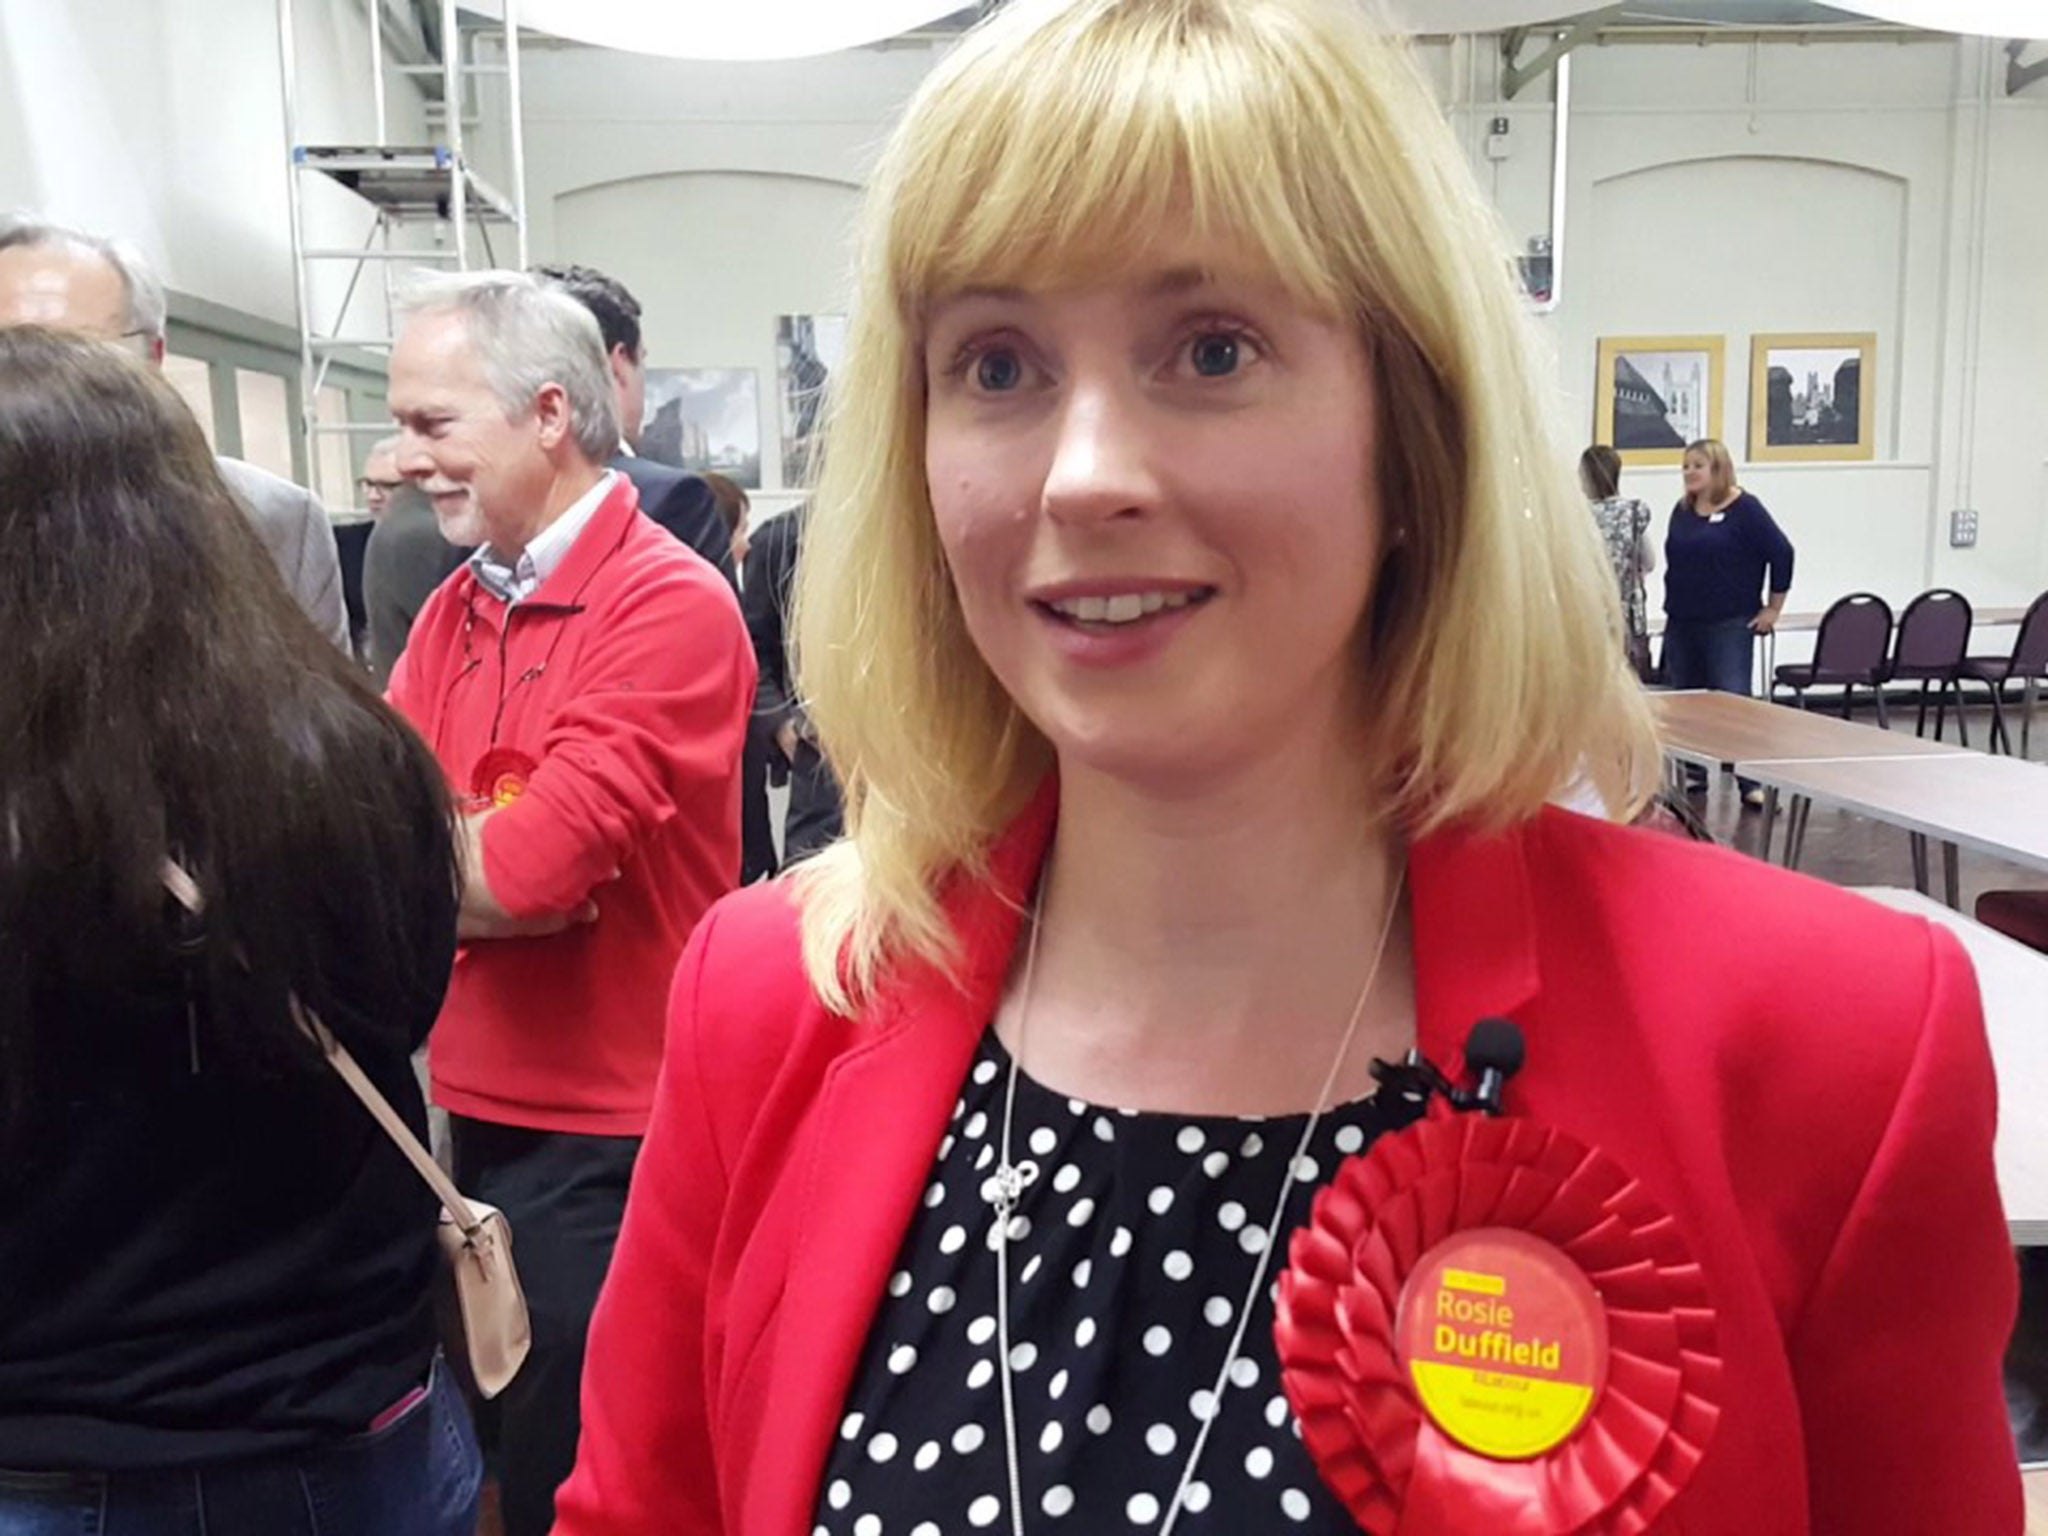 Rosie Duffield, who won Canterbury four years ago, has said what she believes other Labour MPs are thinking